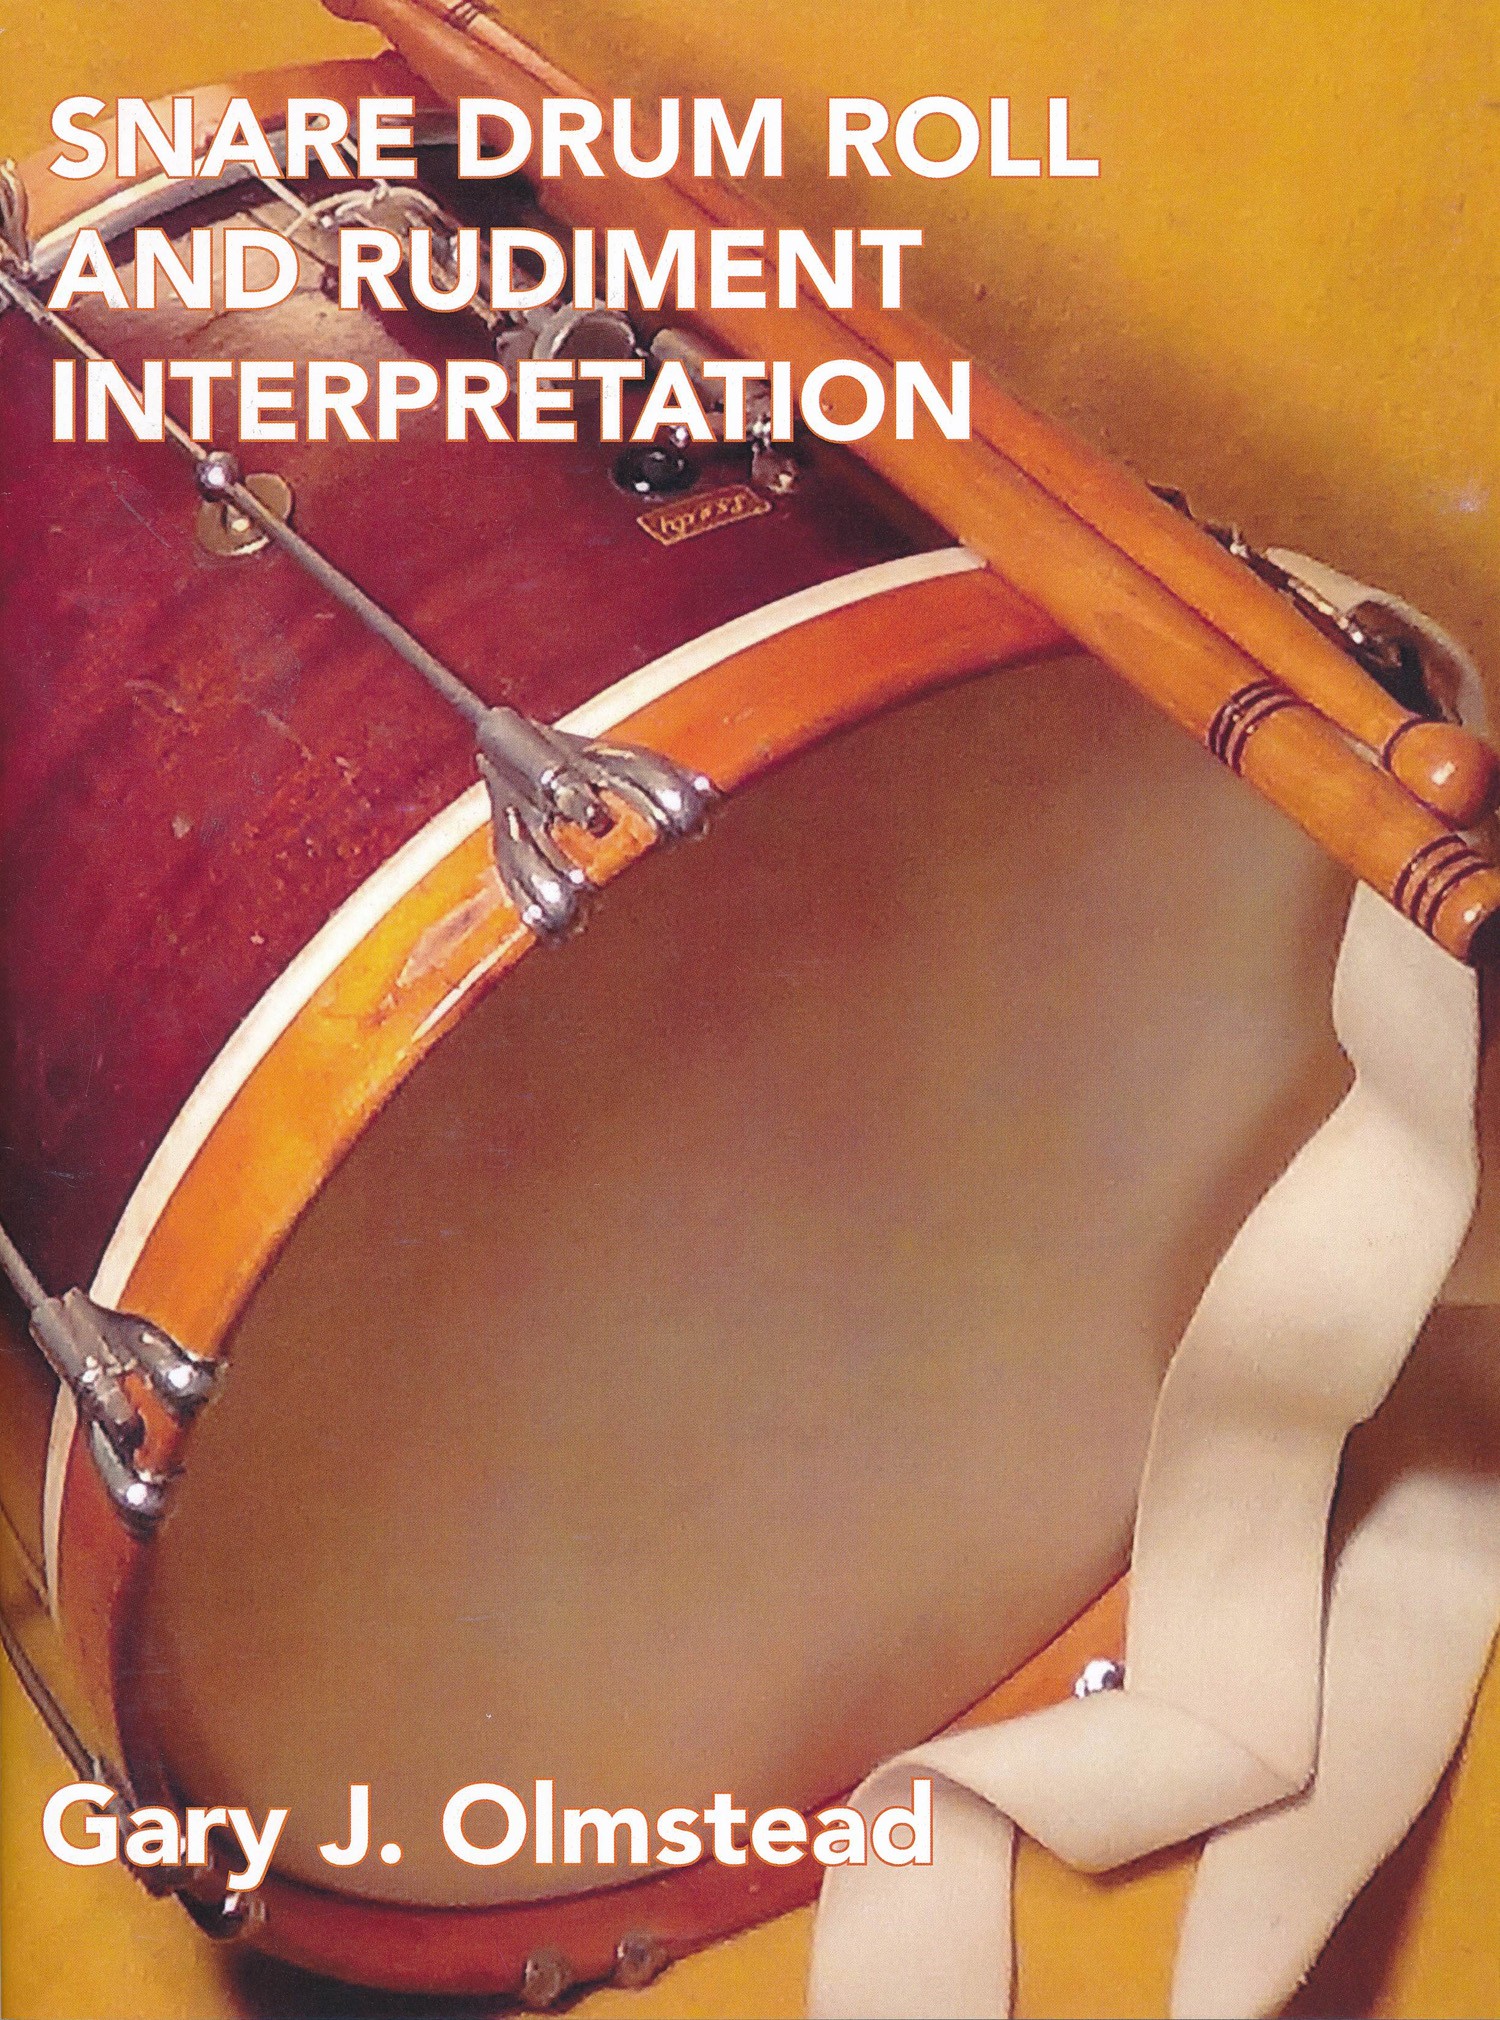 Snare Drum roll and rudiment interpretation by Gary Olmstead